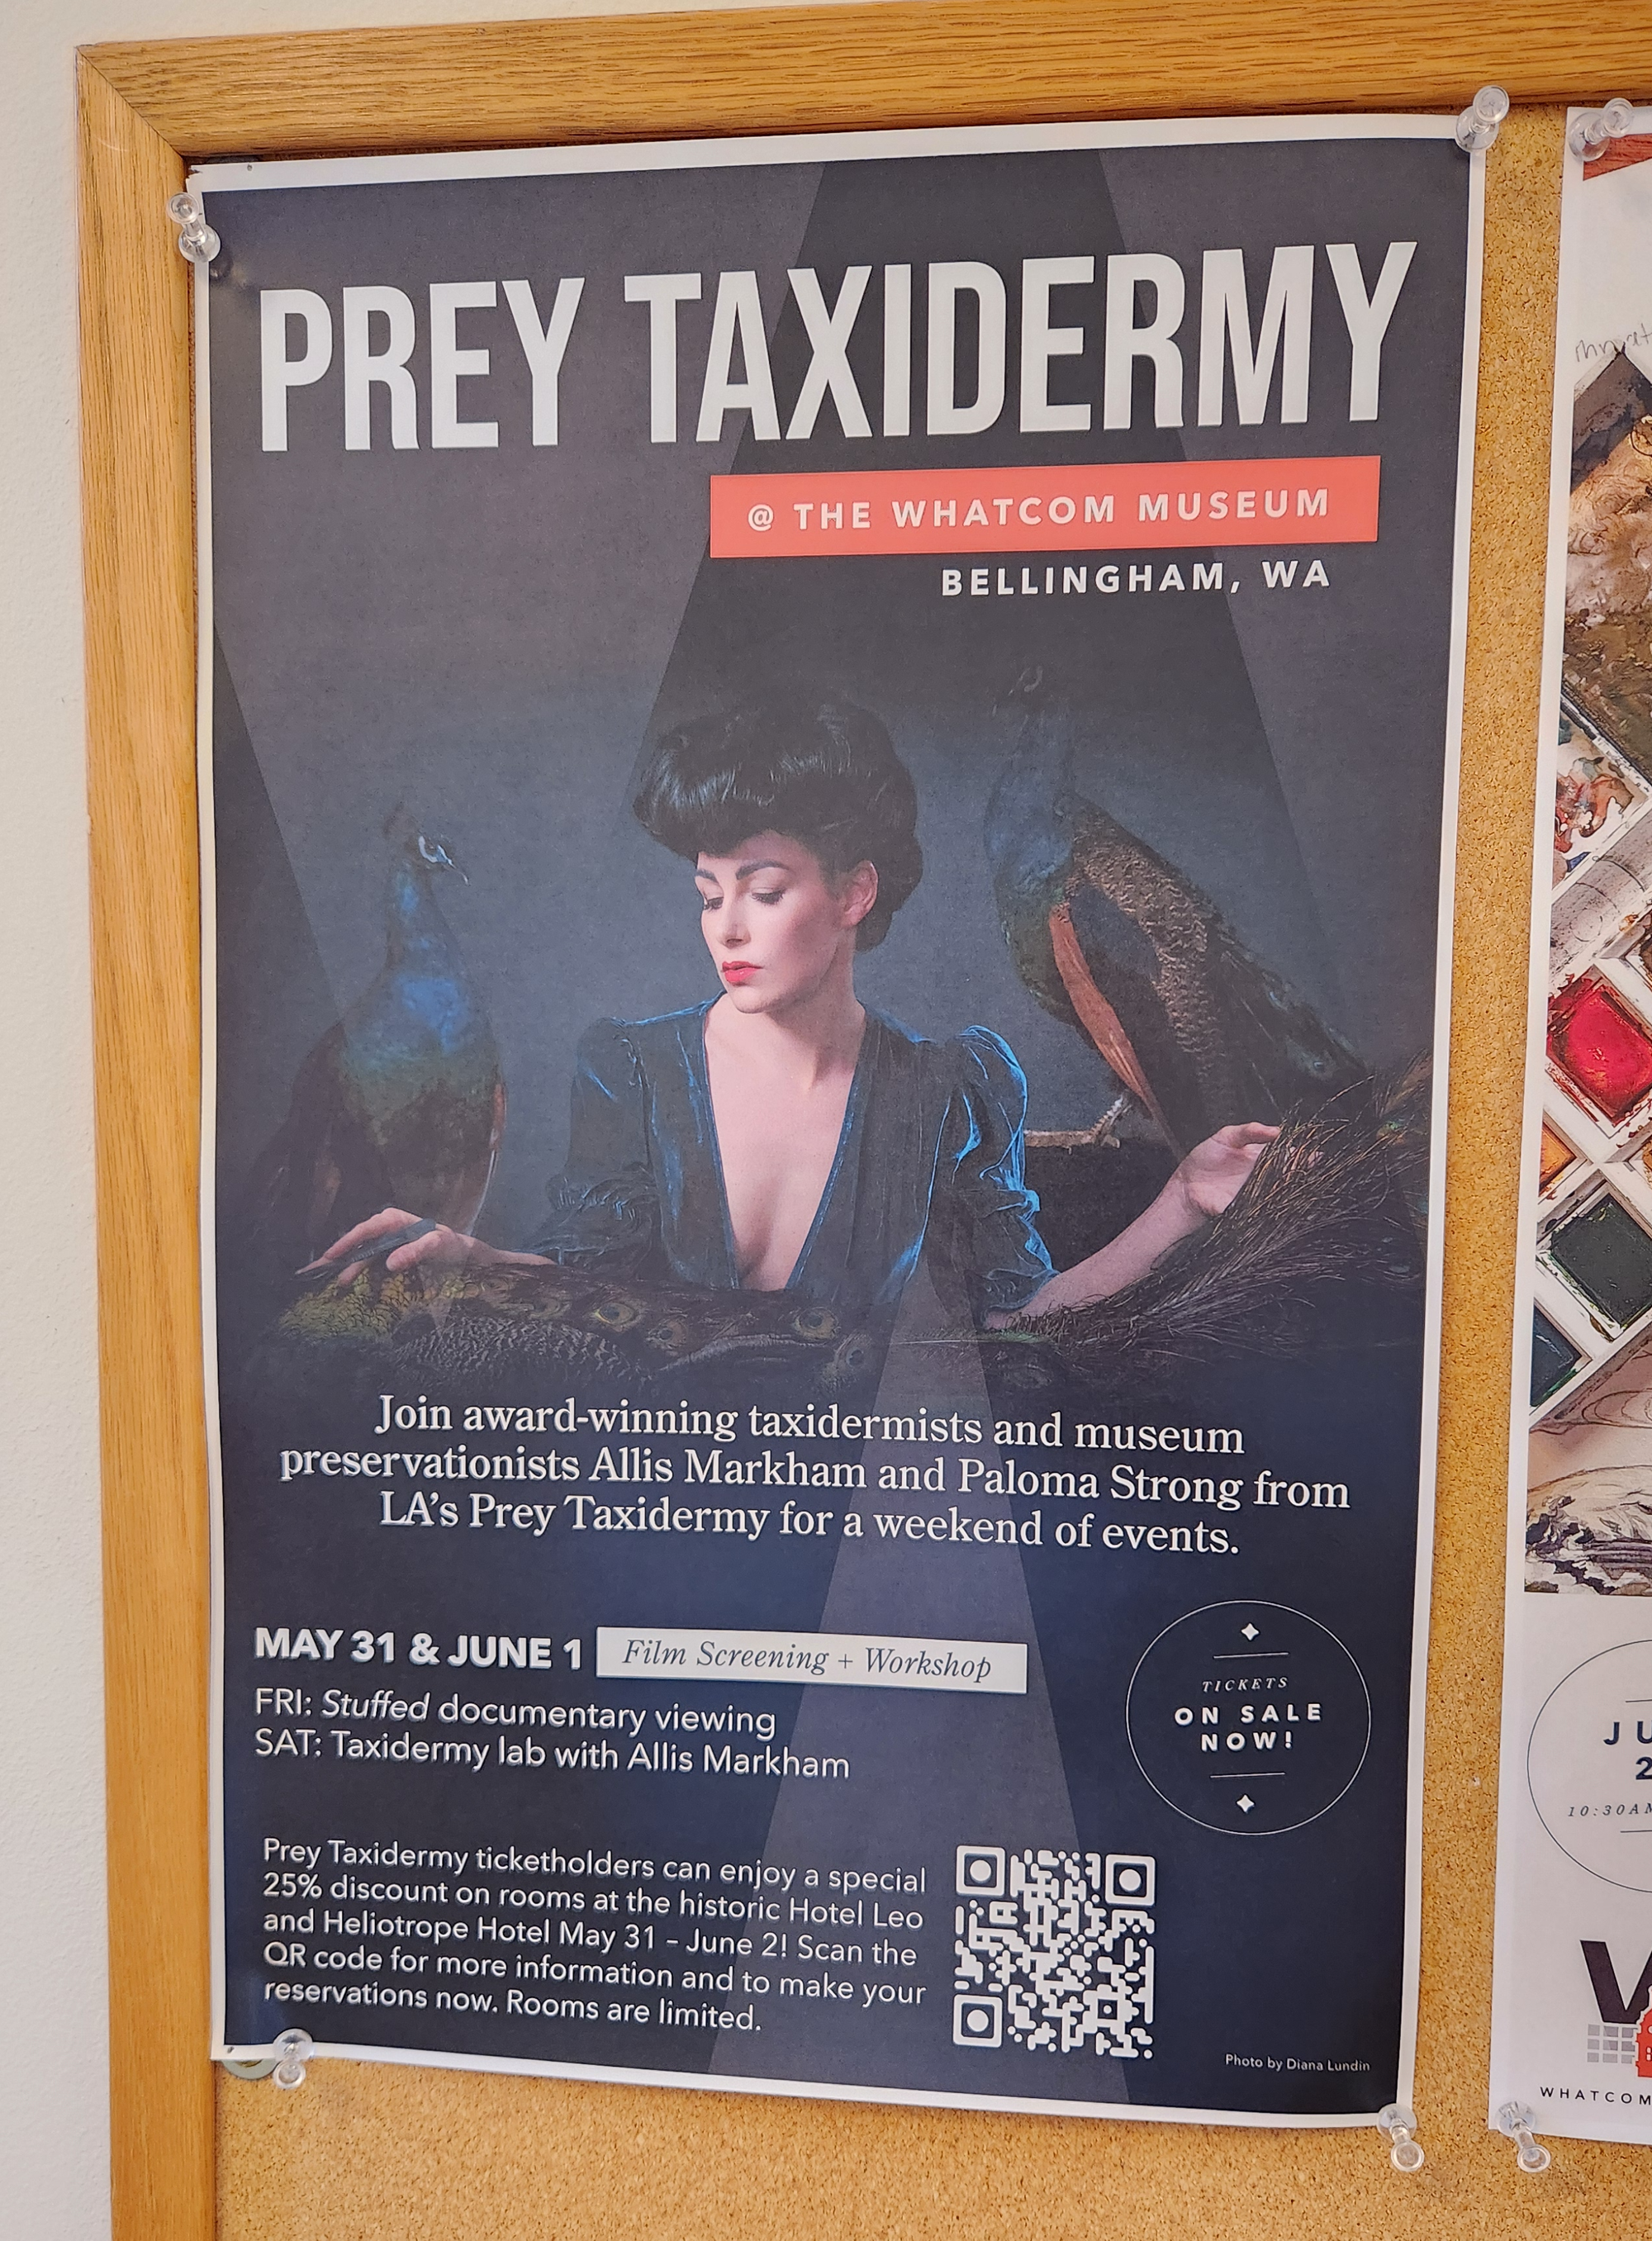 A promotional poster for the Prey Taxidermy film screening and workshop at the Whatcom Museum.